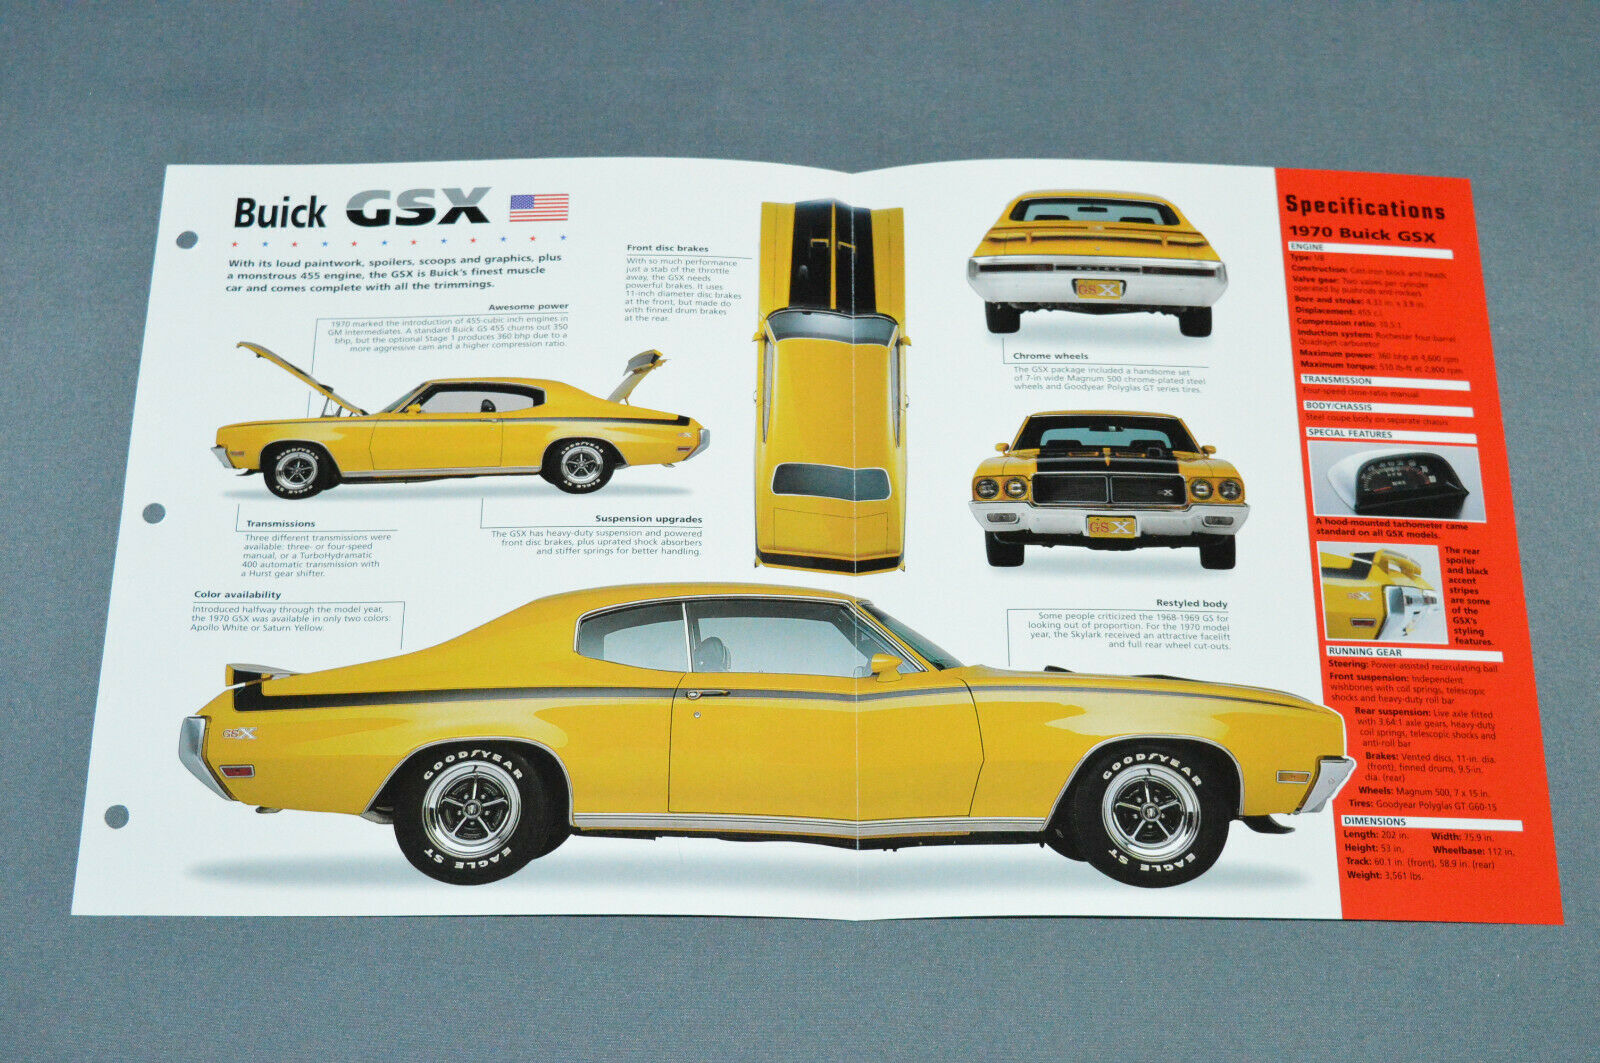 1970 BUICK GSX 455 V8 American Muscle Car SPEC SHEET BROCHURE PHOTO BOOKLET